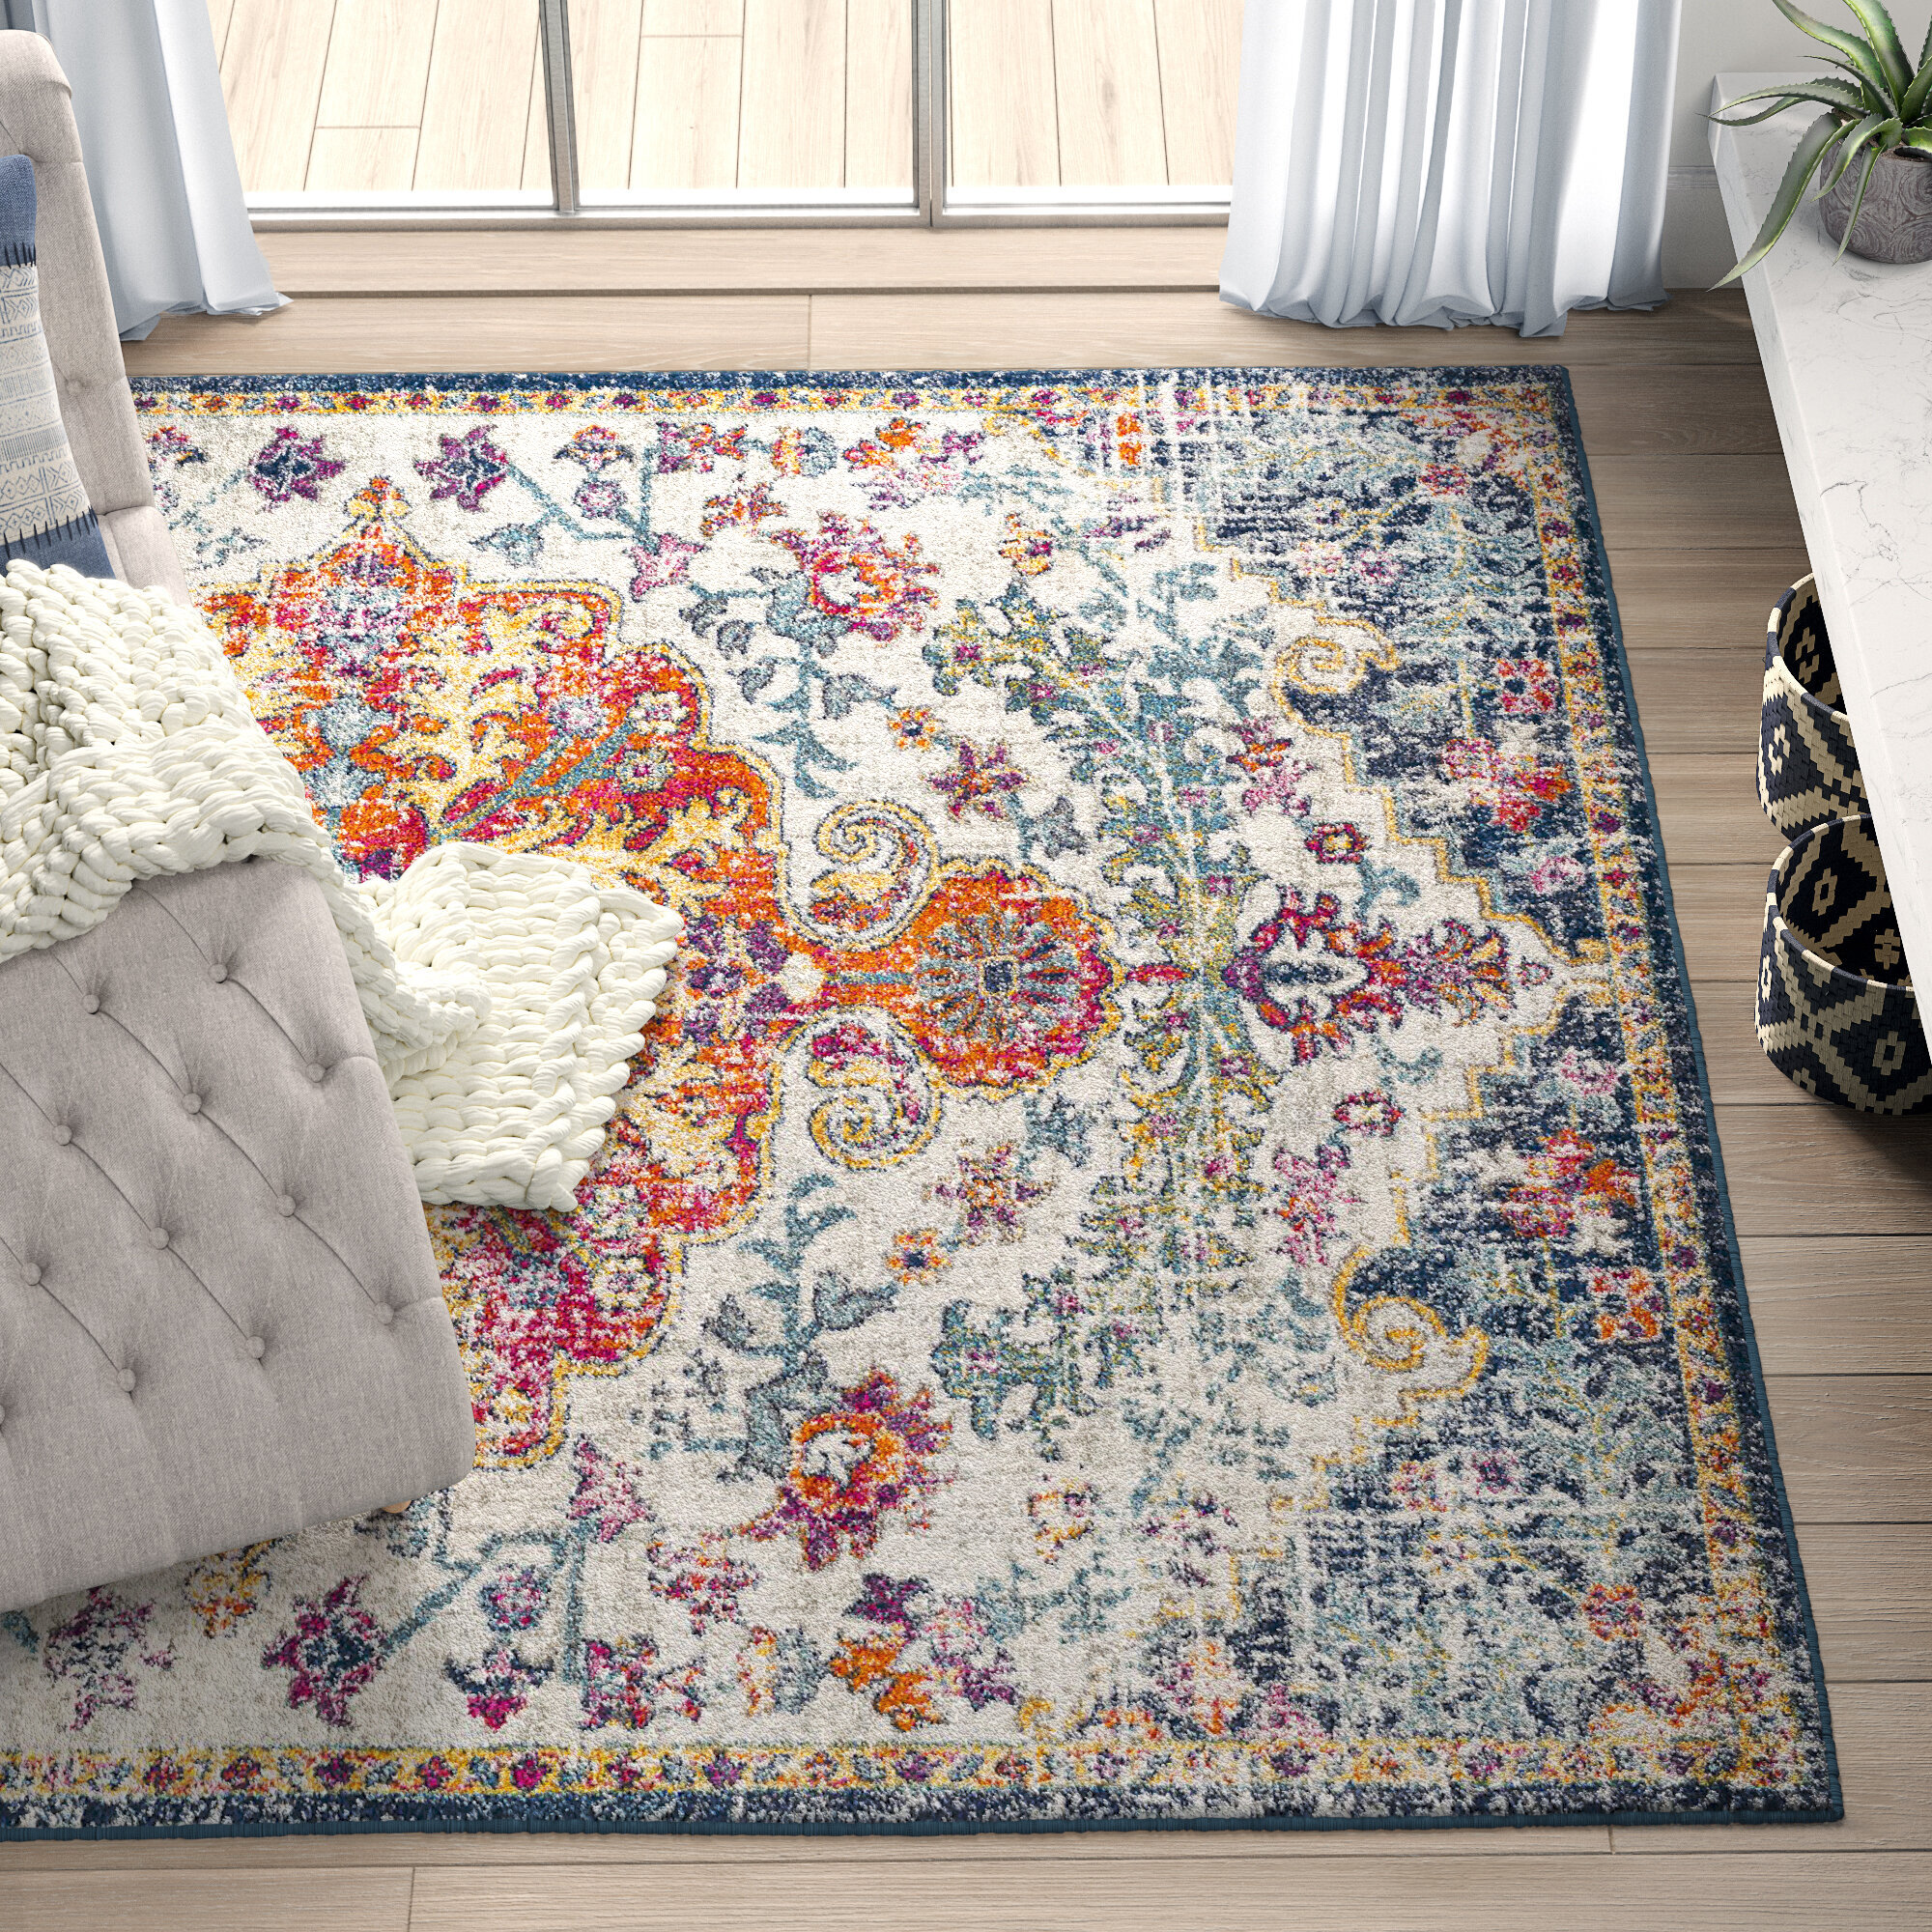 NEW MULTI THICK SOFT QUALITY LARGE LOW PRICE MODERN FLORAL SALE DISCOUNT RUG MAT 